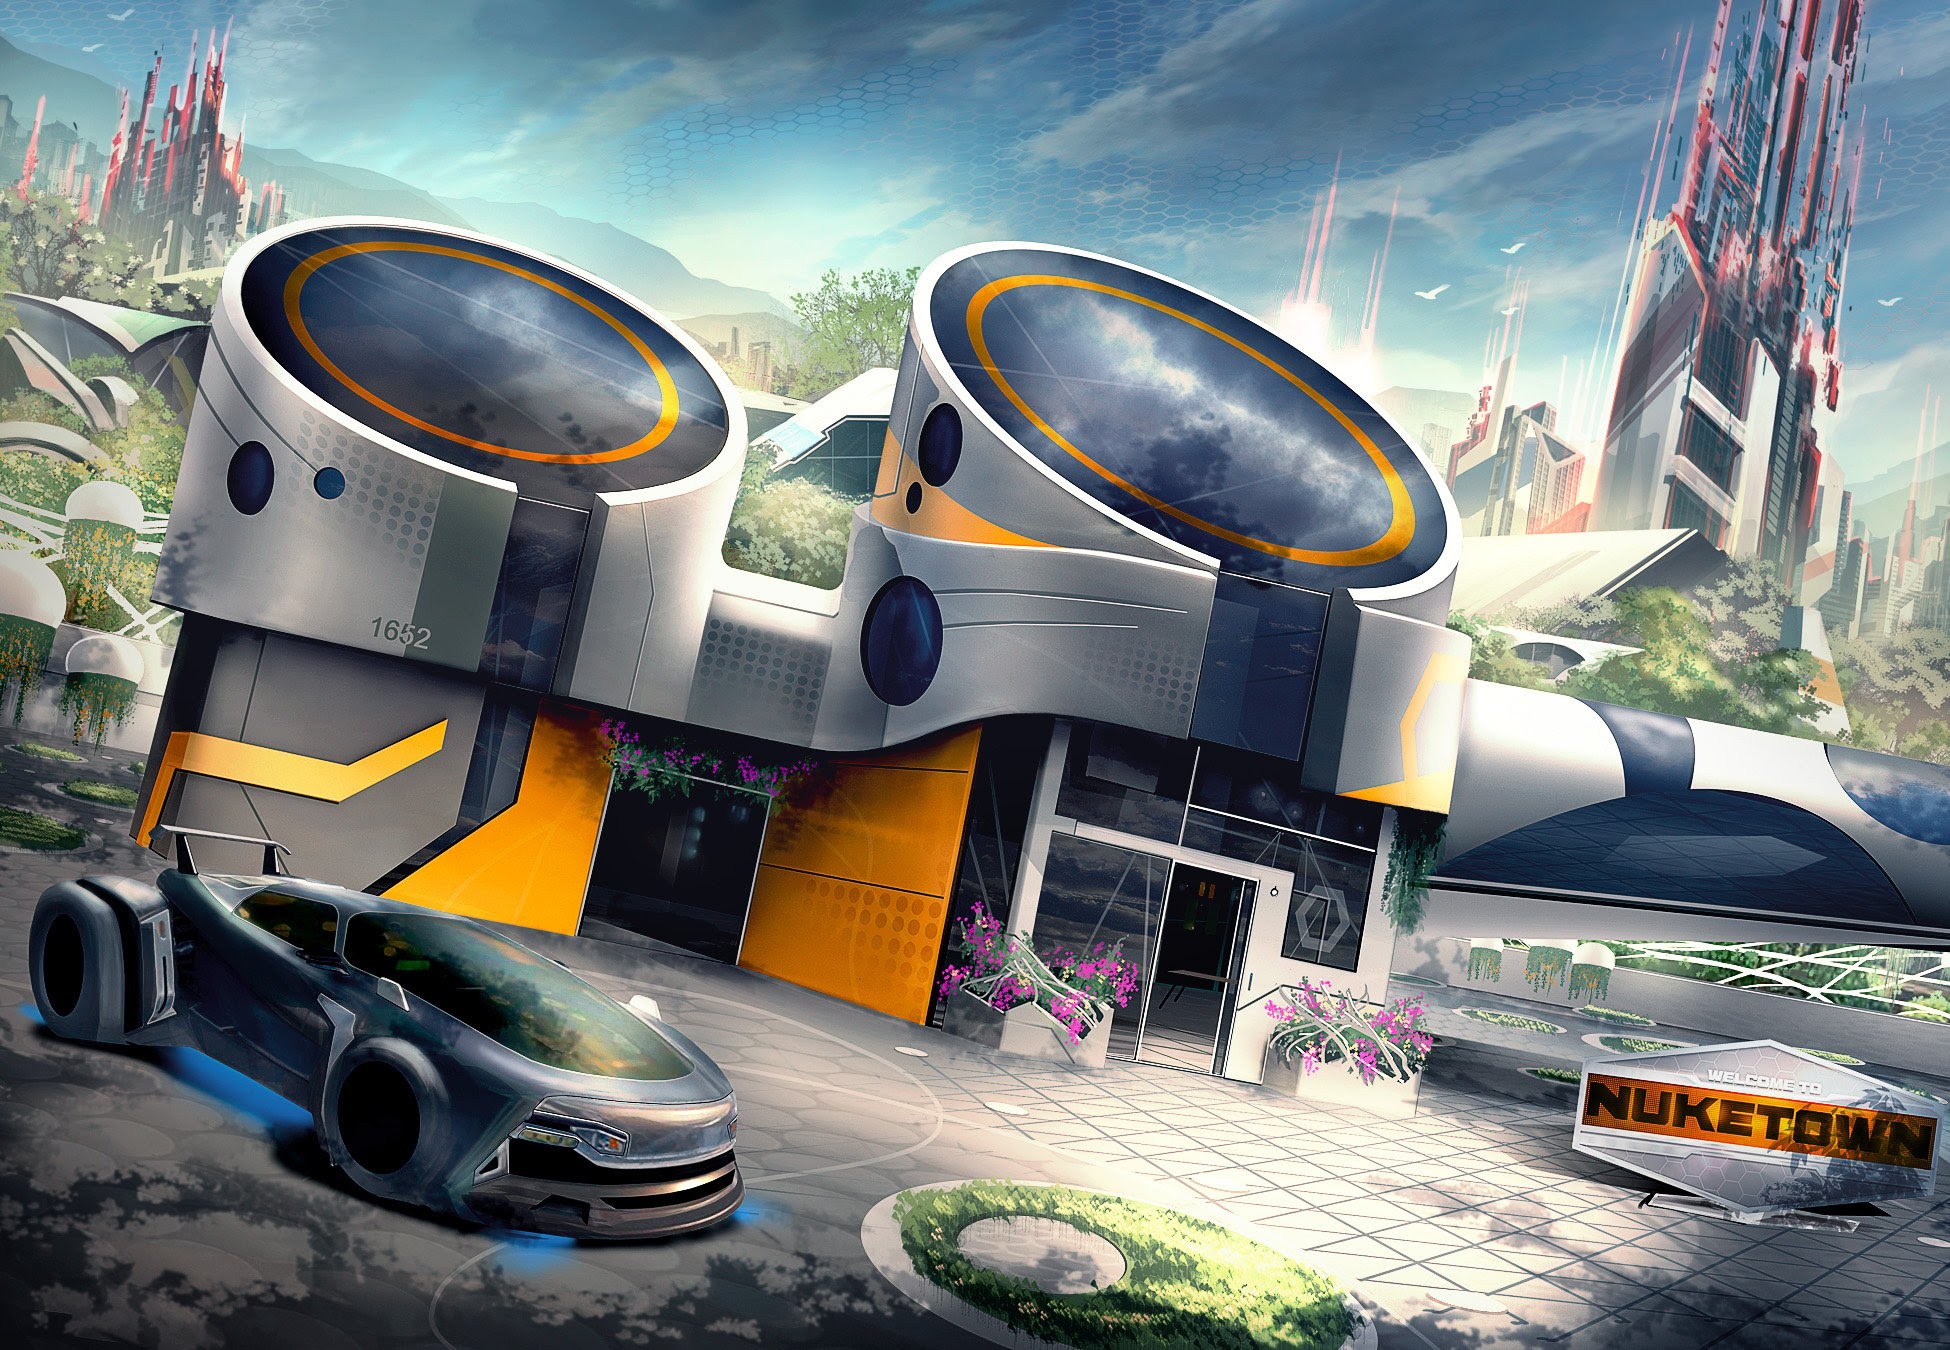 NUK3TOWN Returns in Call of Duty: Black Ops III on PS4 ...